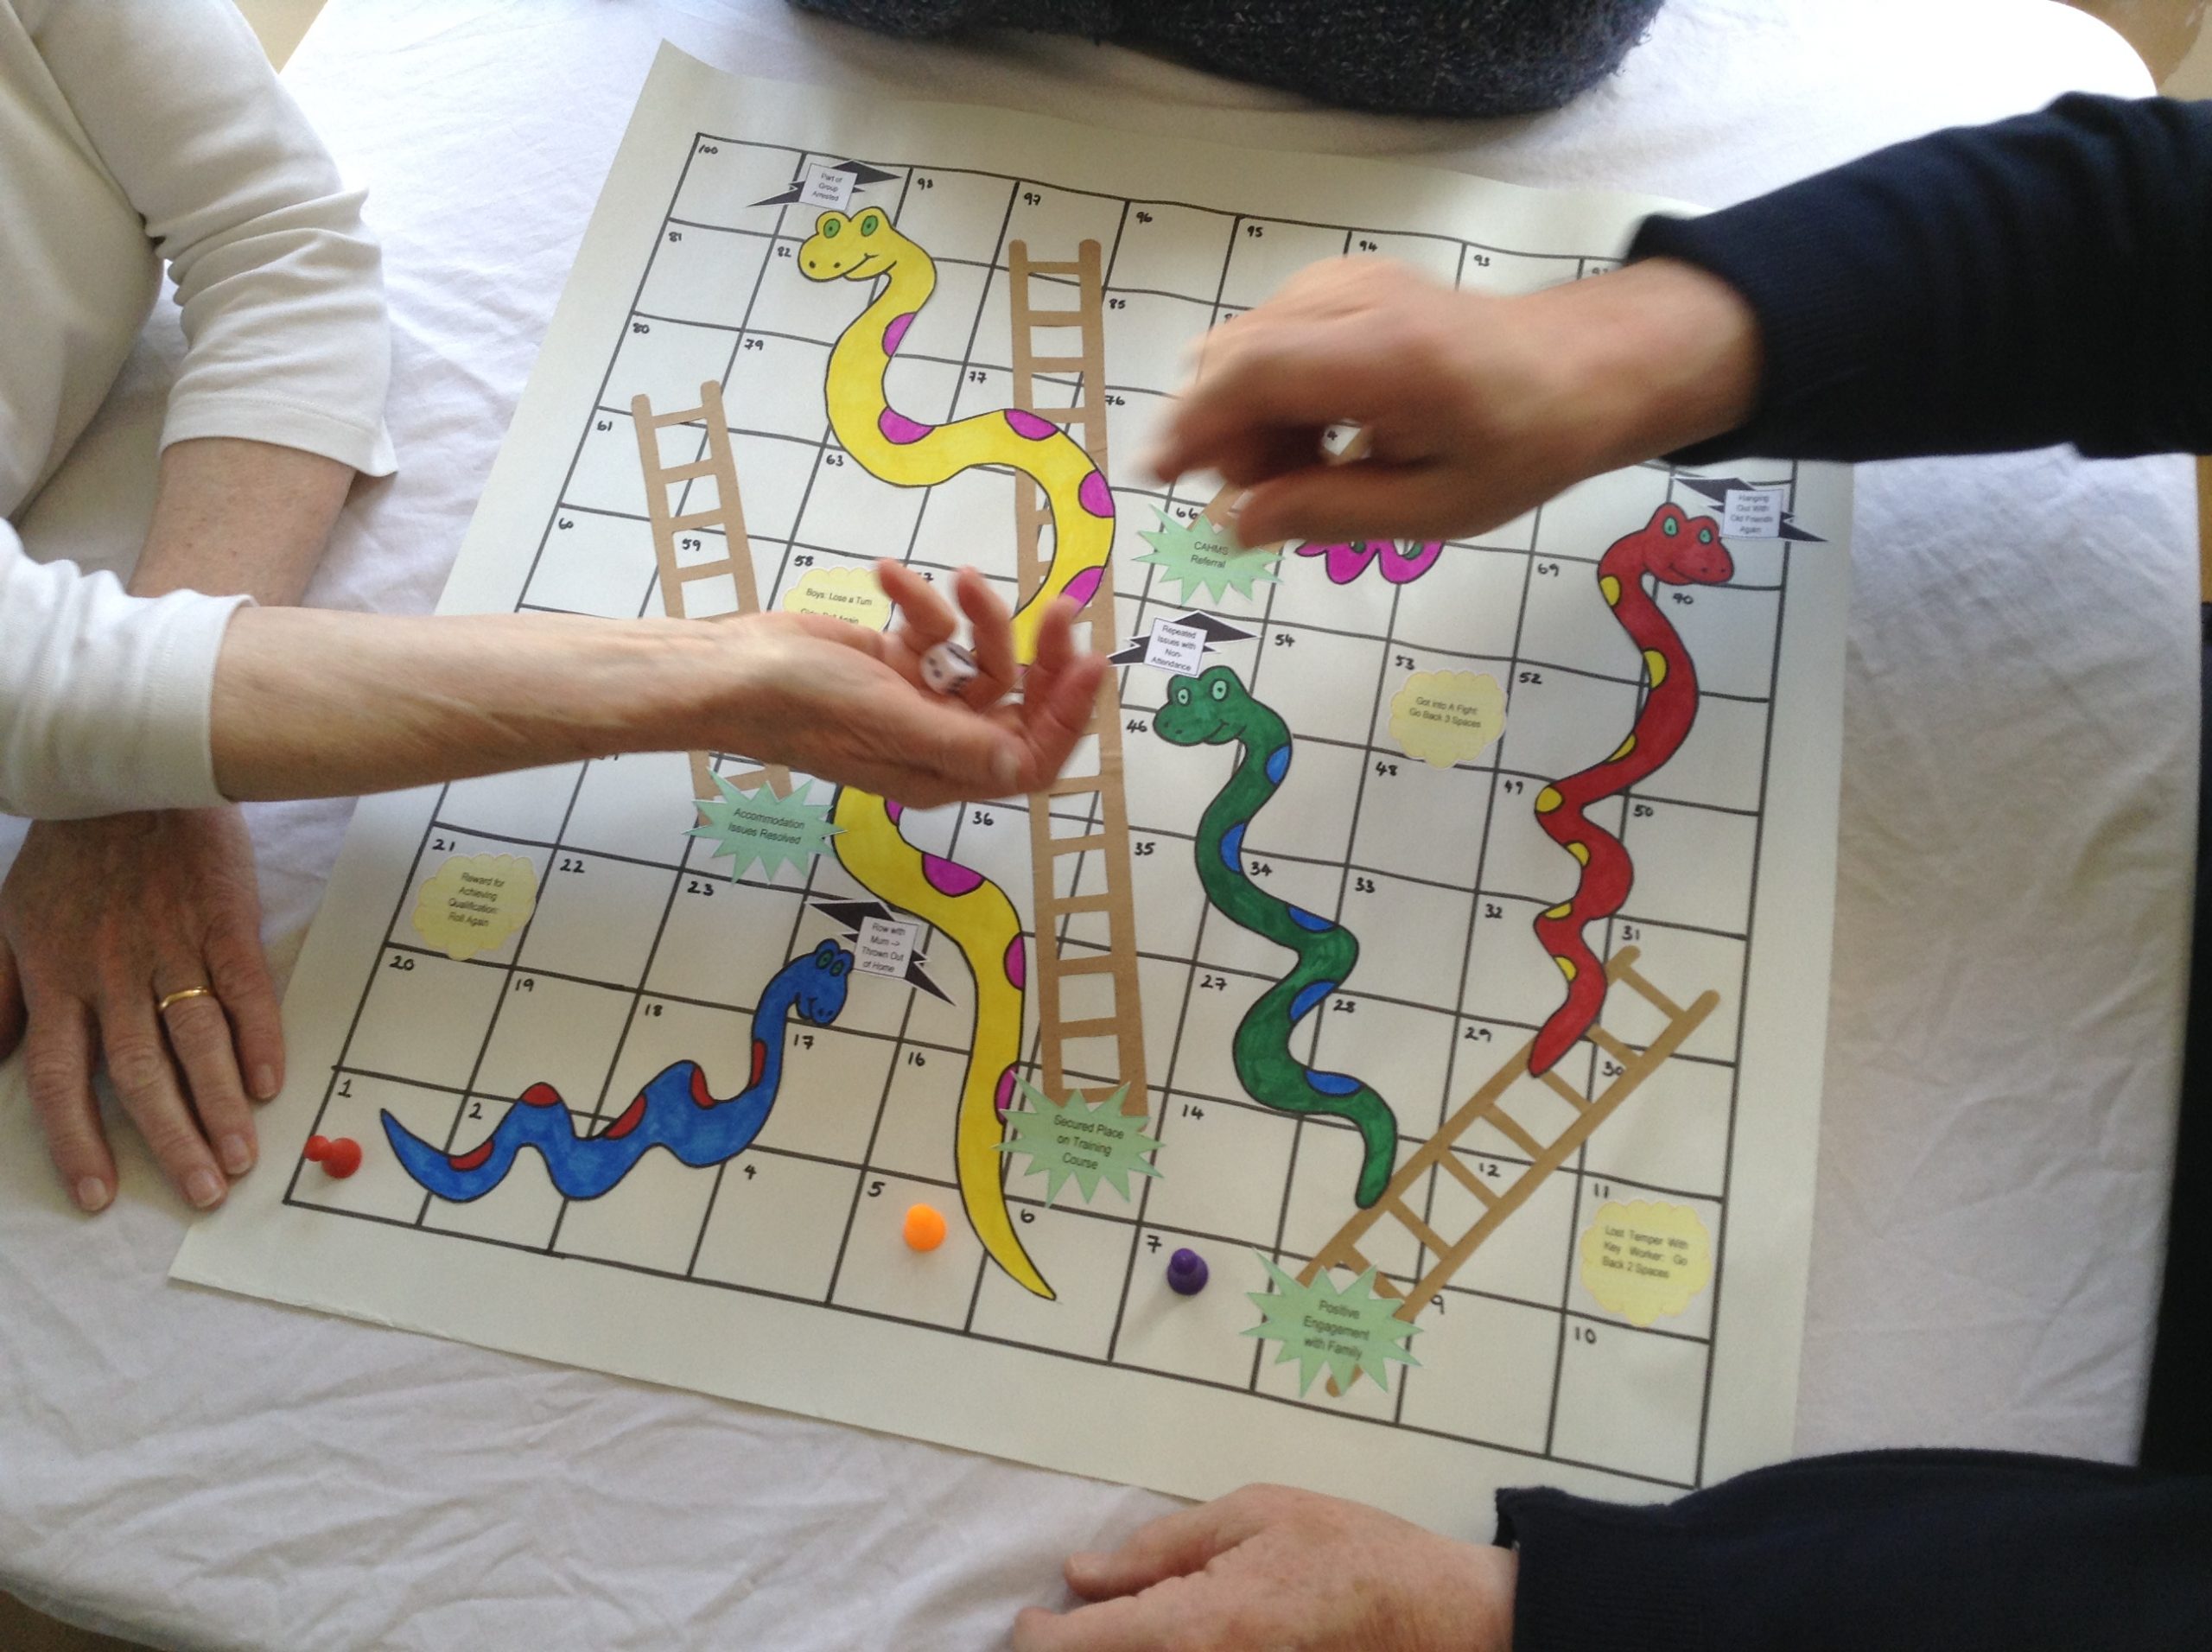 Snakes and Ladders: Developing a training tool for use in the youth justice system